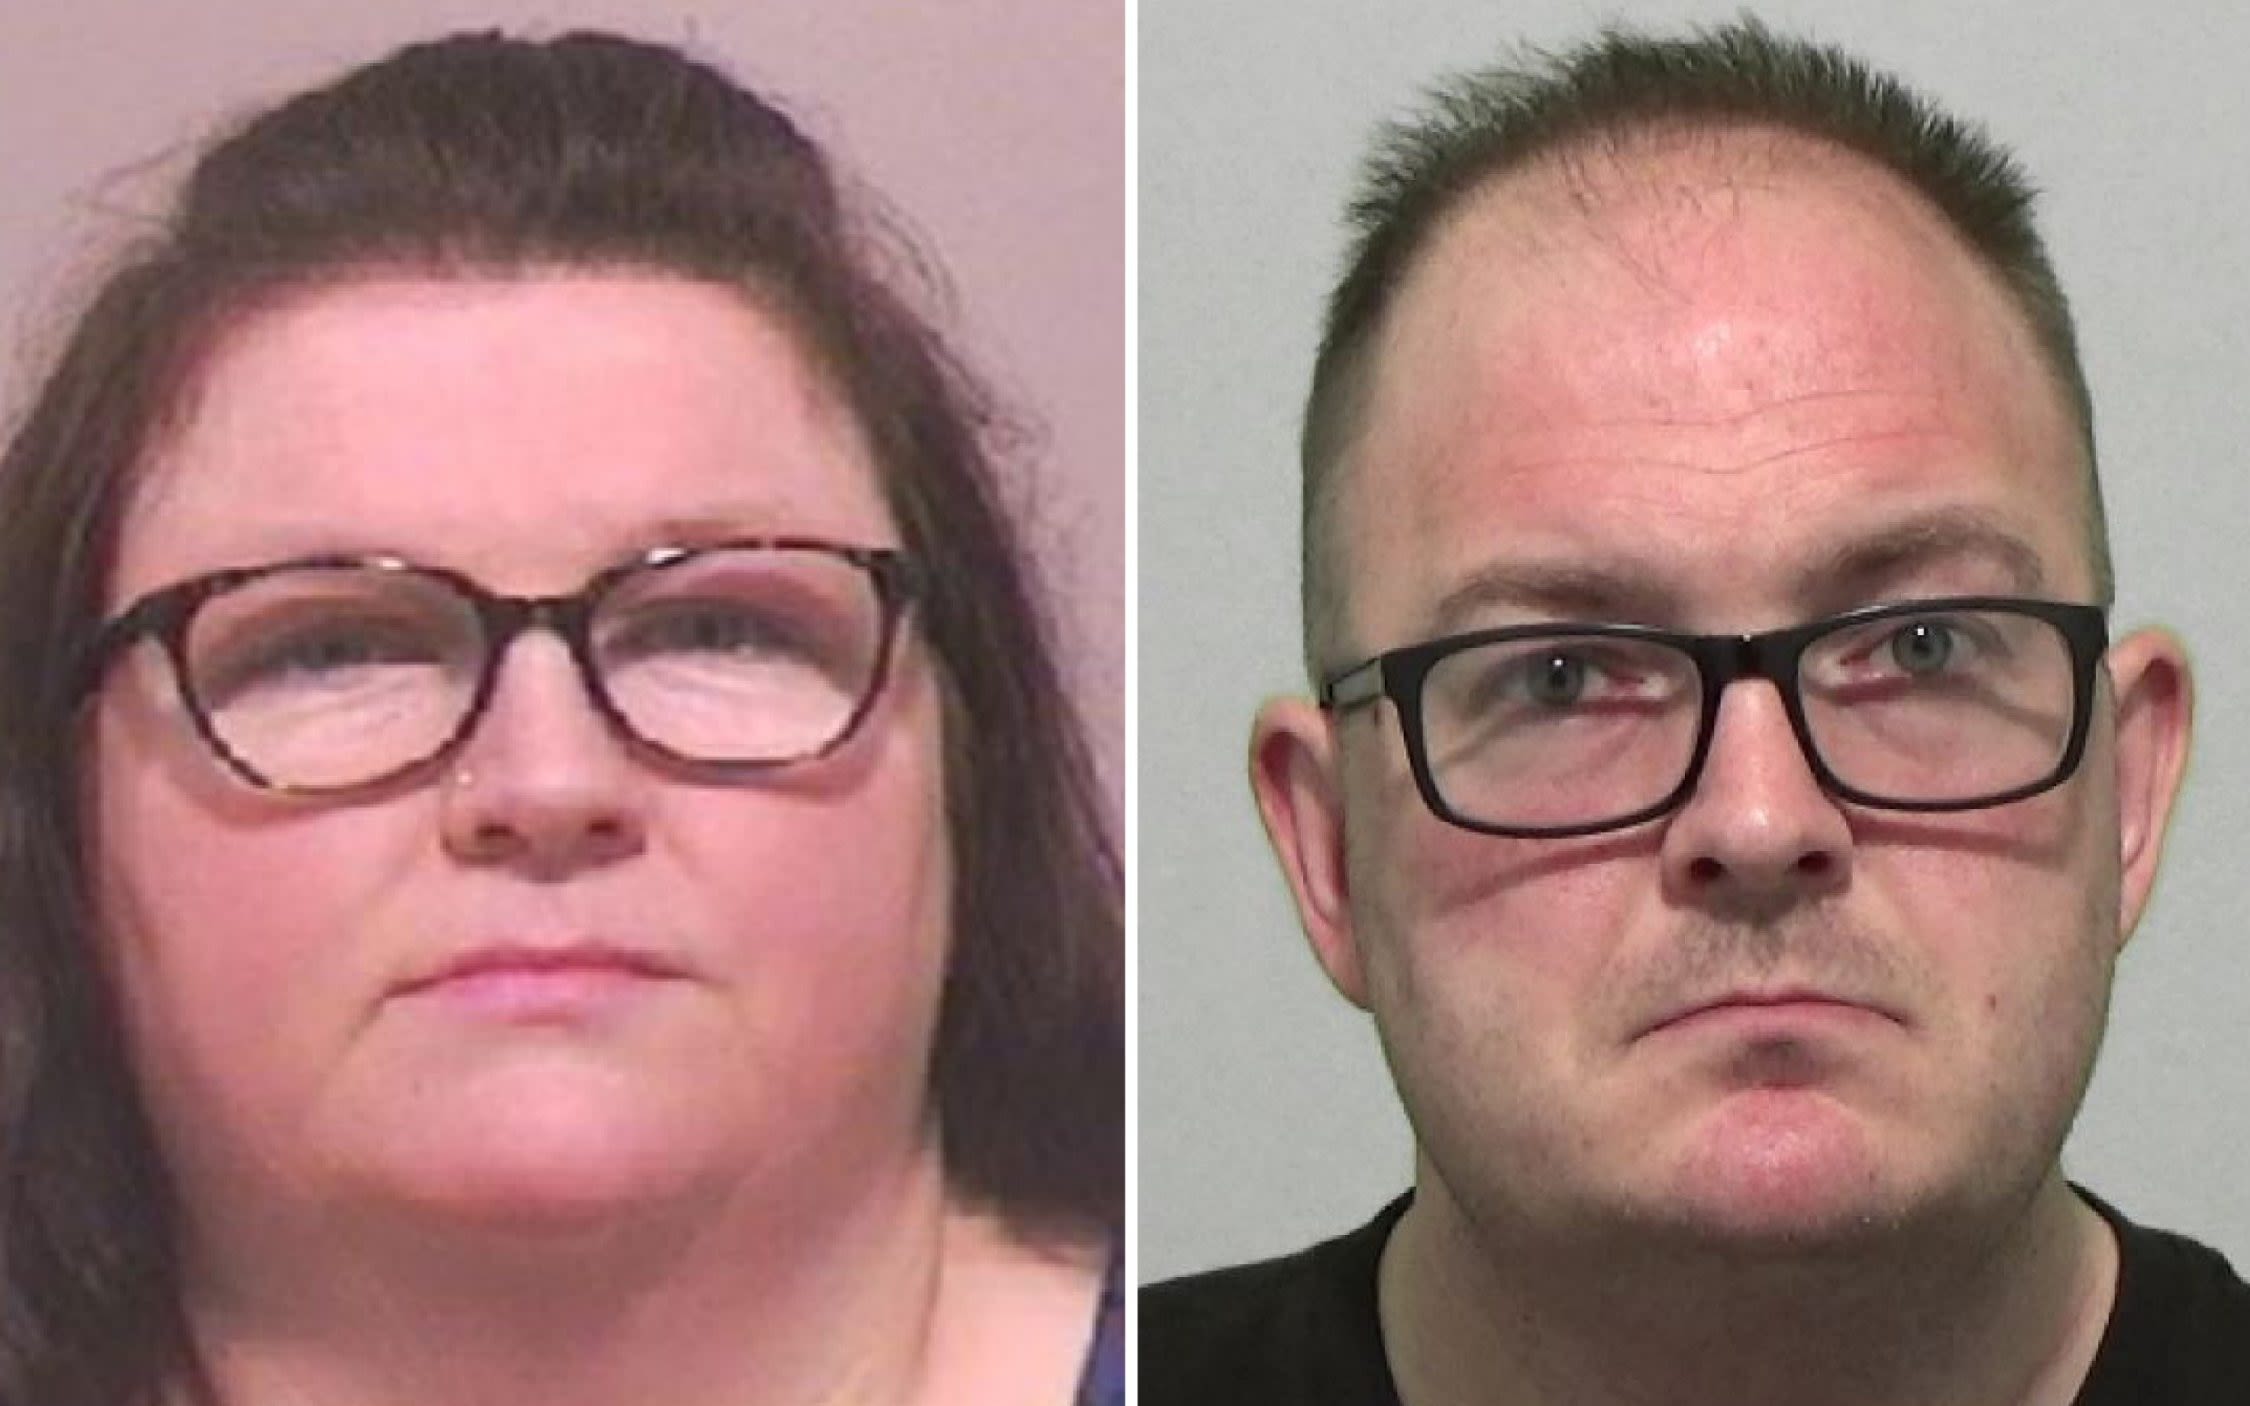 ‘Greedy’ HMRC worker who stole £300k in child benefit only has to pay back £1